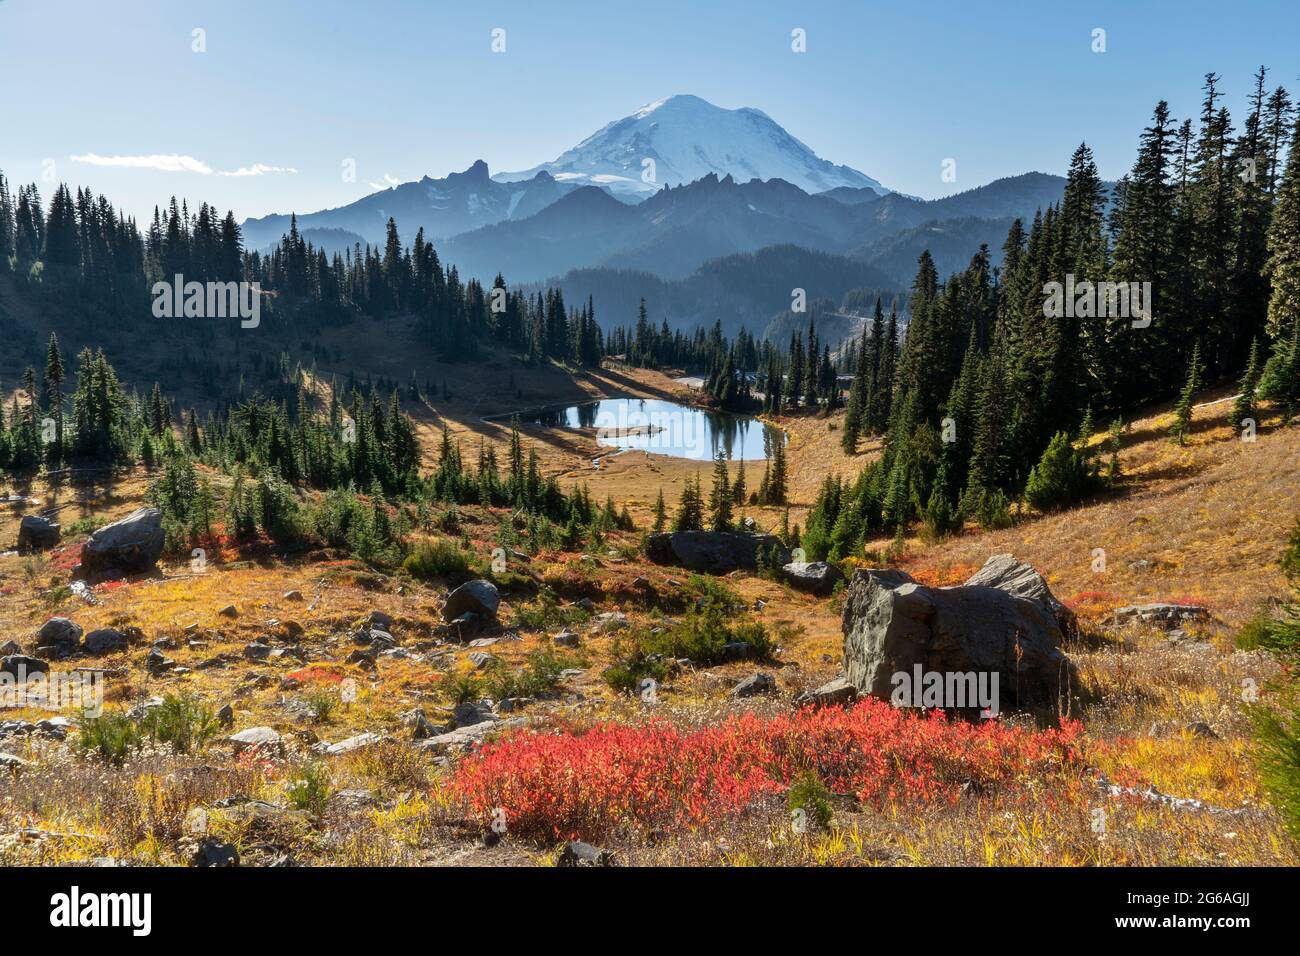 Autumn In The Chinook Pass Area of Rainier National Park Stock Photo